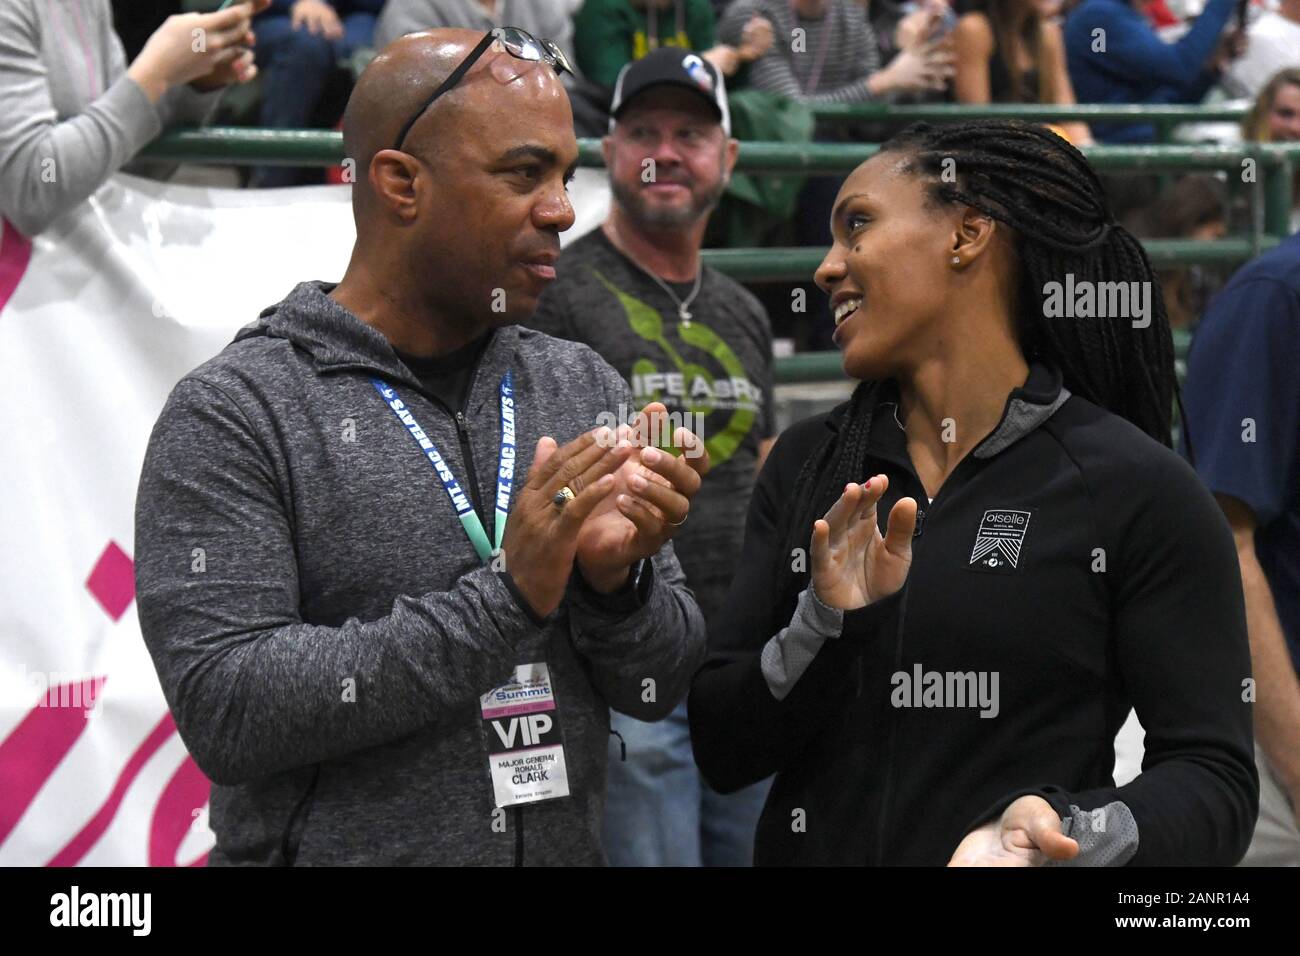 United States Army major general Ronald Clark (Ronald P. Clark (left) talks  with daughter Megan Clark during the National Pole Vault Summit, Friday,  Jan. 17, 2020, in Reno, Nev. (Photo by IOS/ESPA-Images